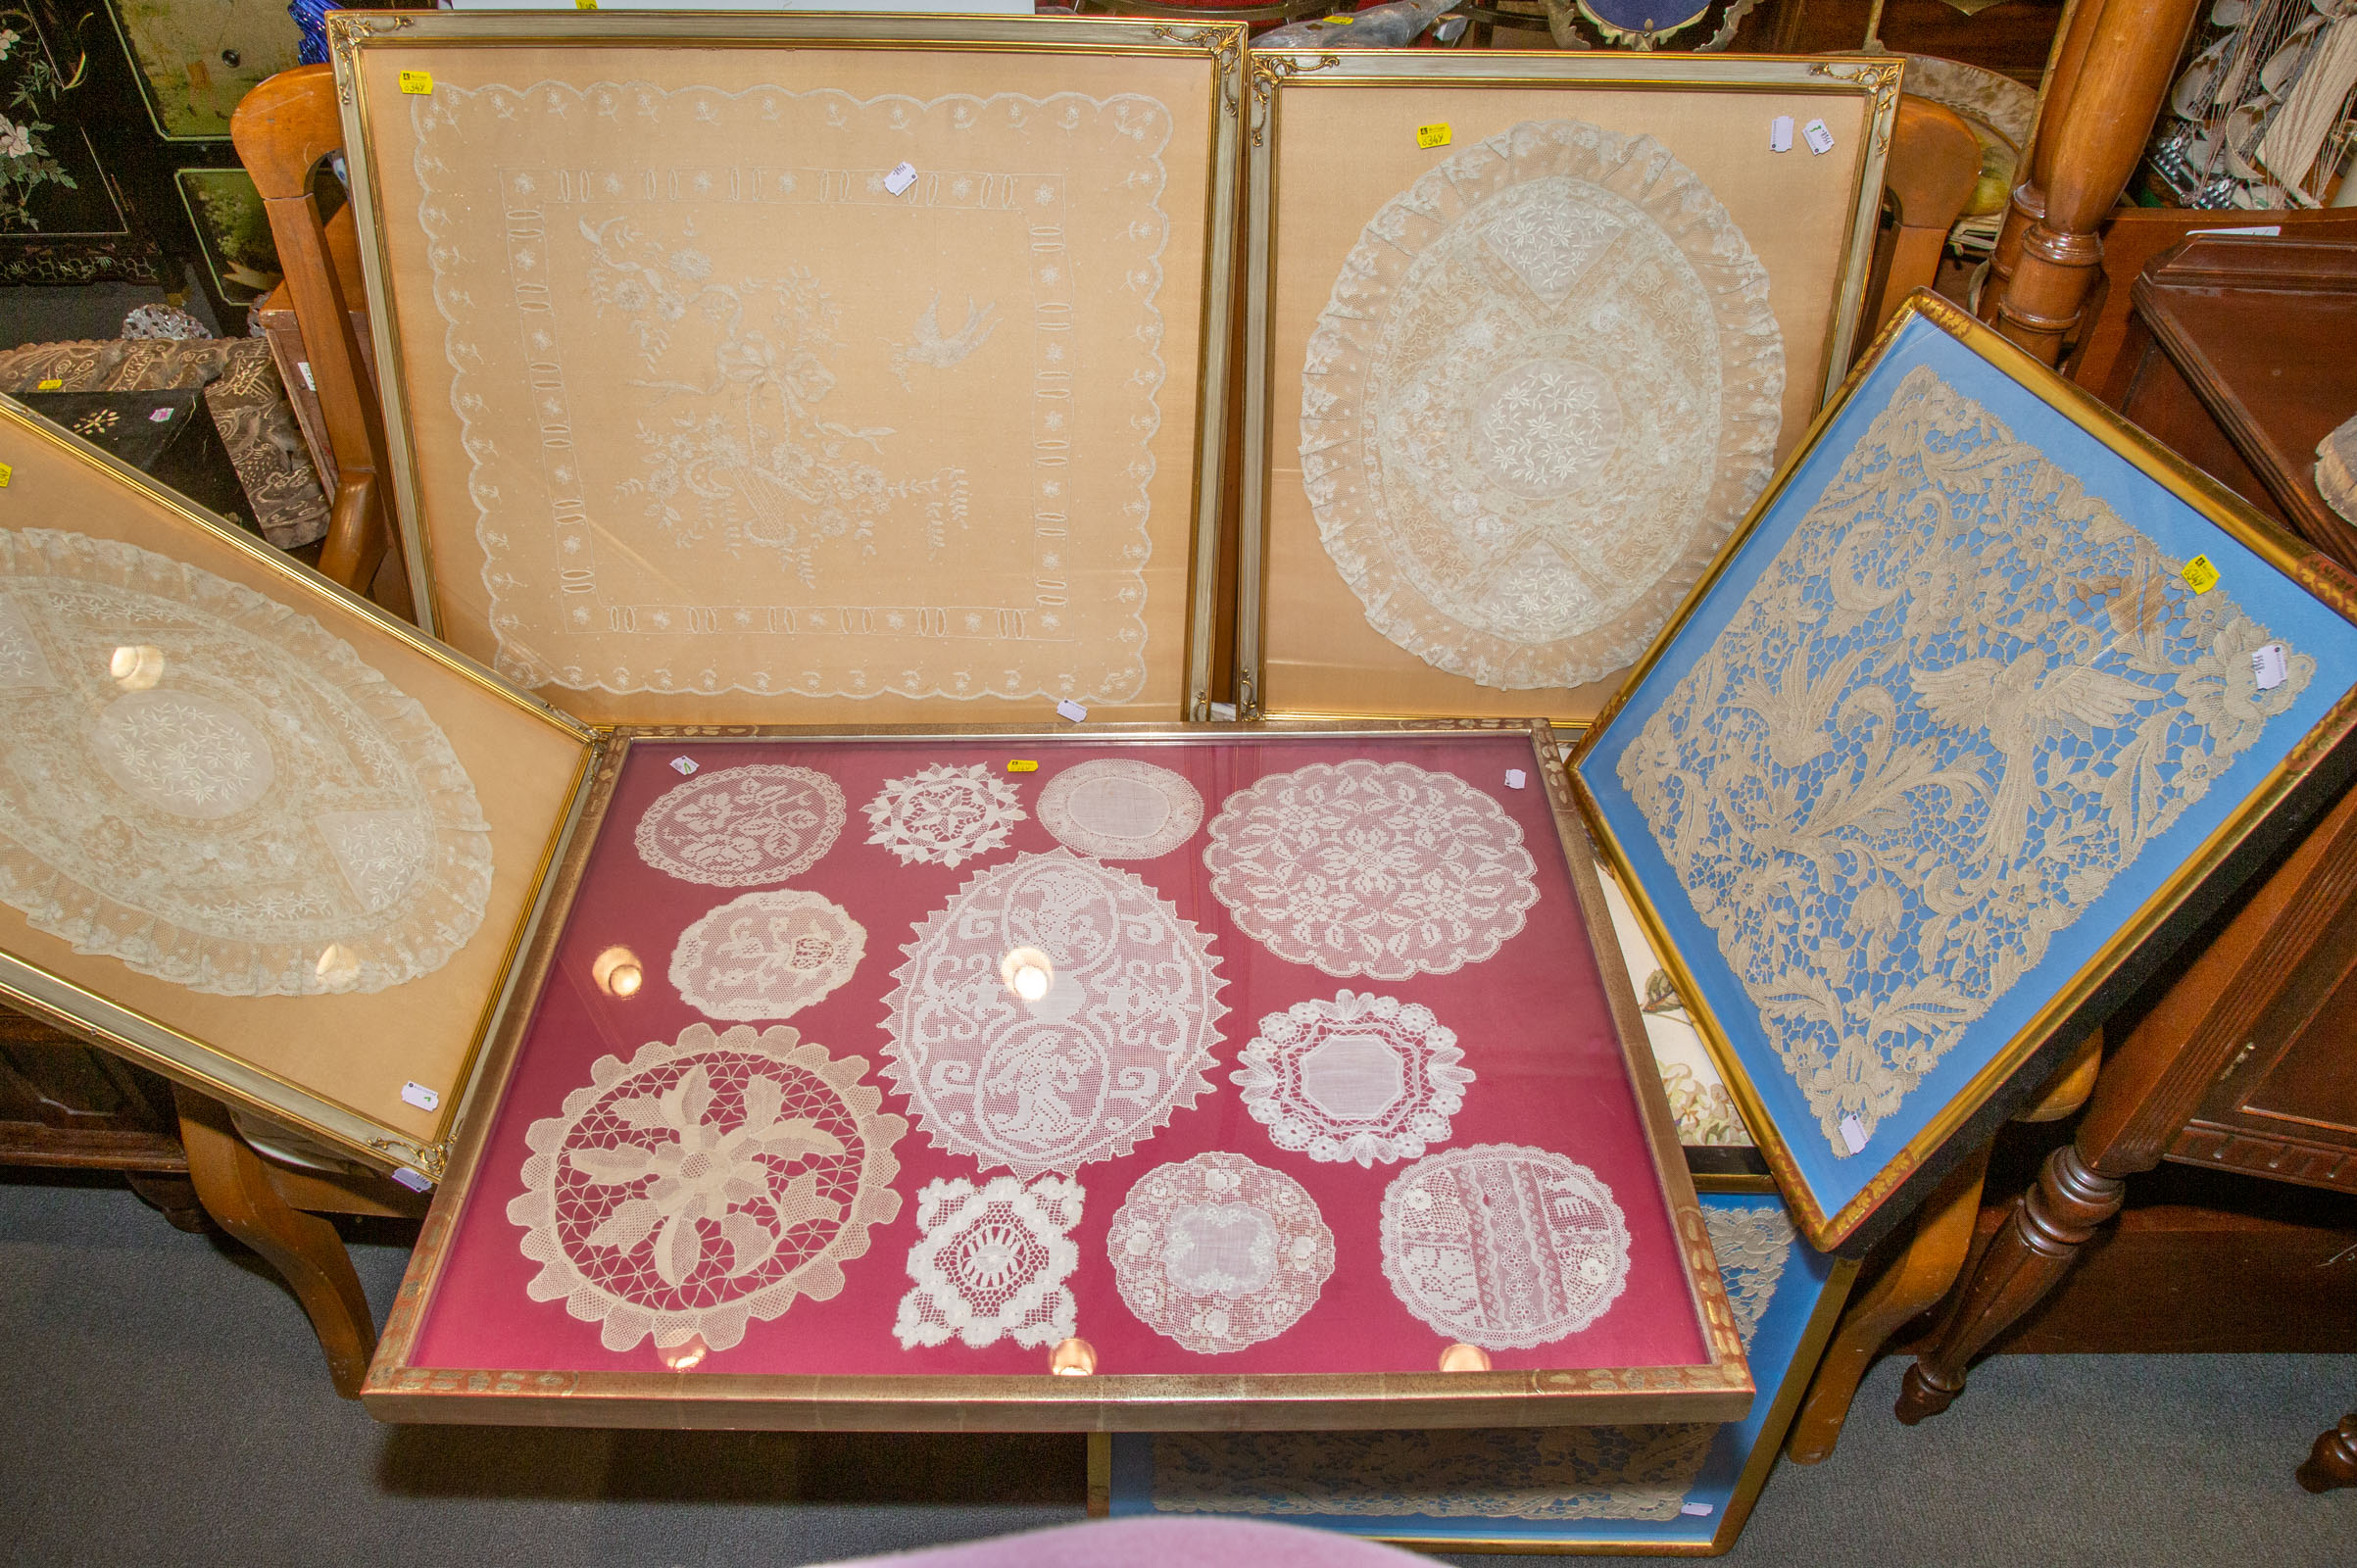 COLLECTION OF LACE DOILIES & PANELS